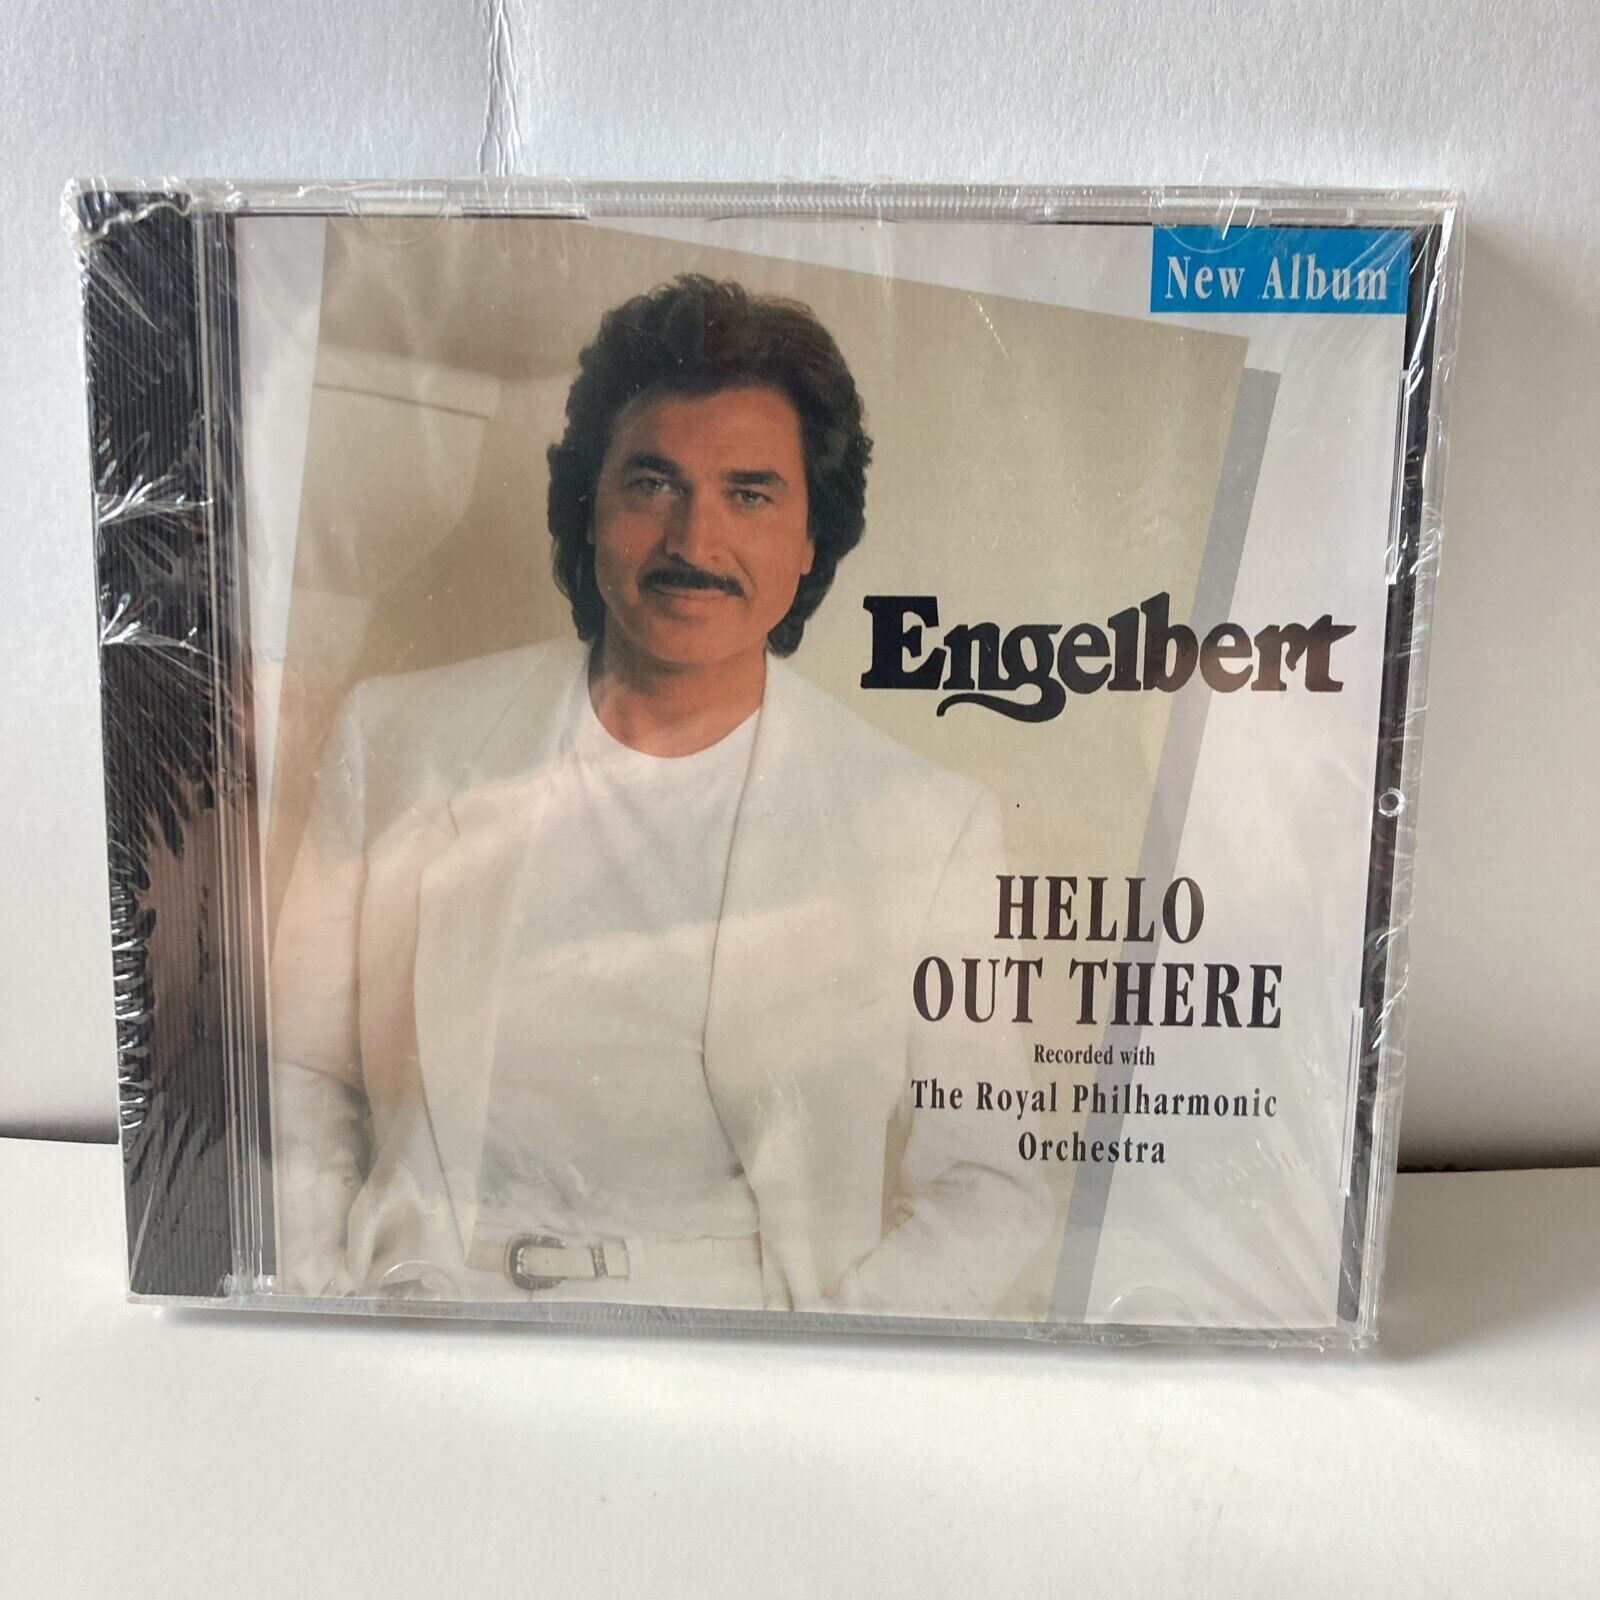 Engelbert Humperdinck Hello Out There Recorded W/Royal Philharmonic Orch CD